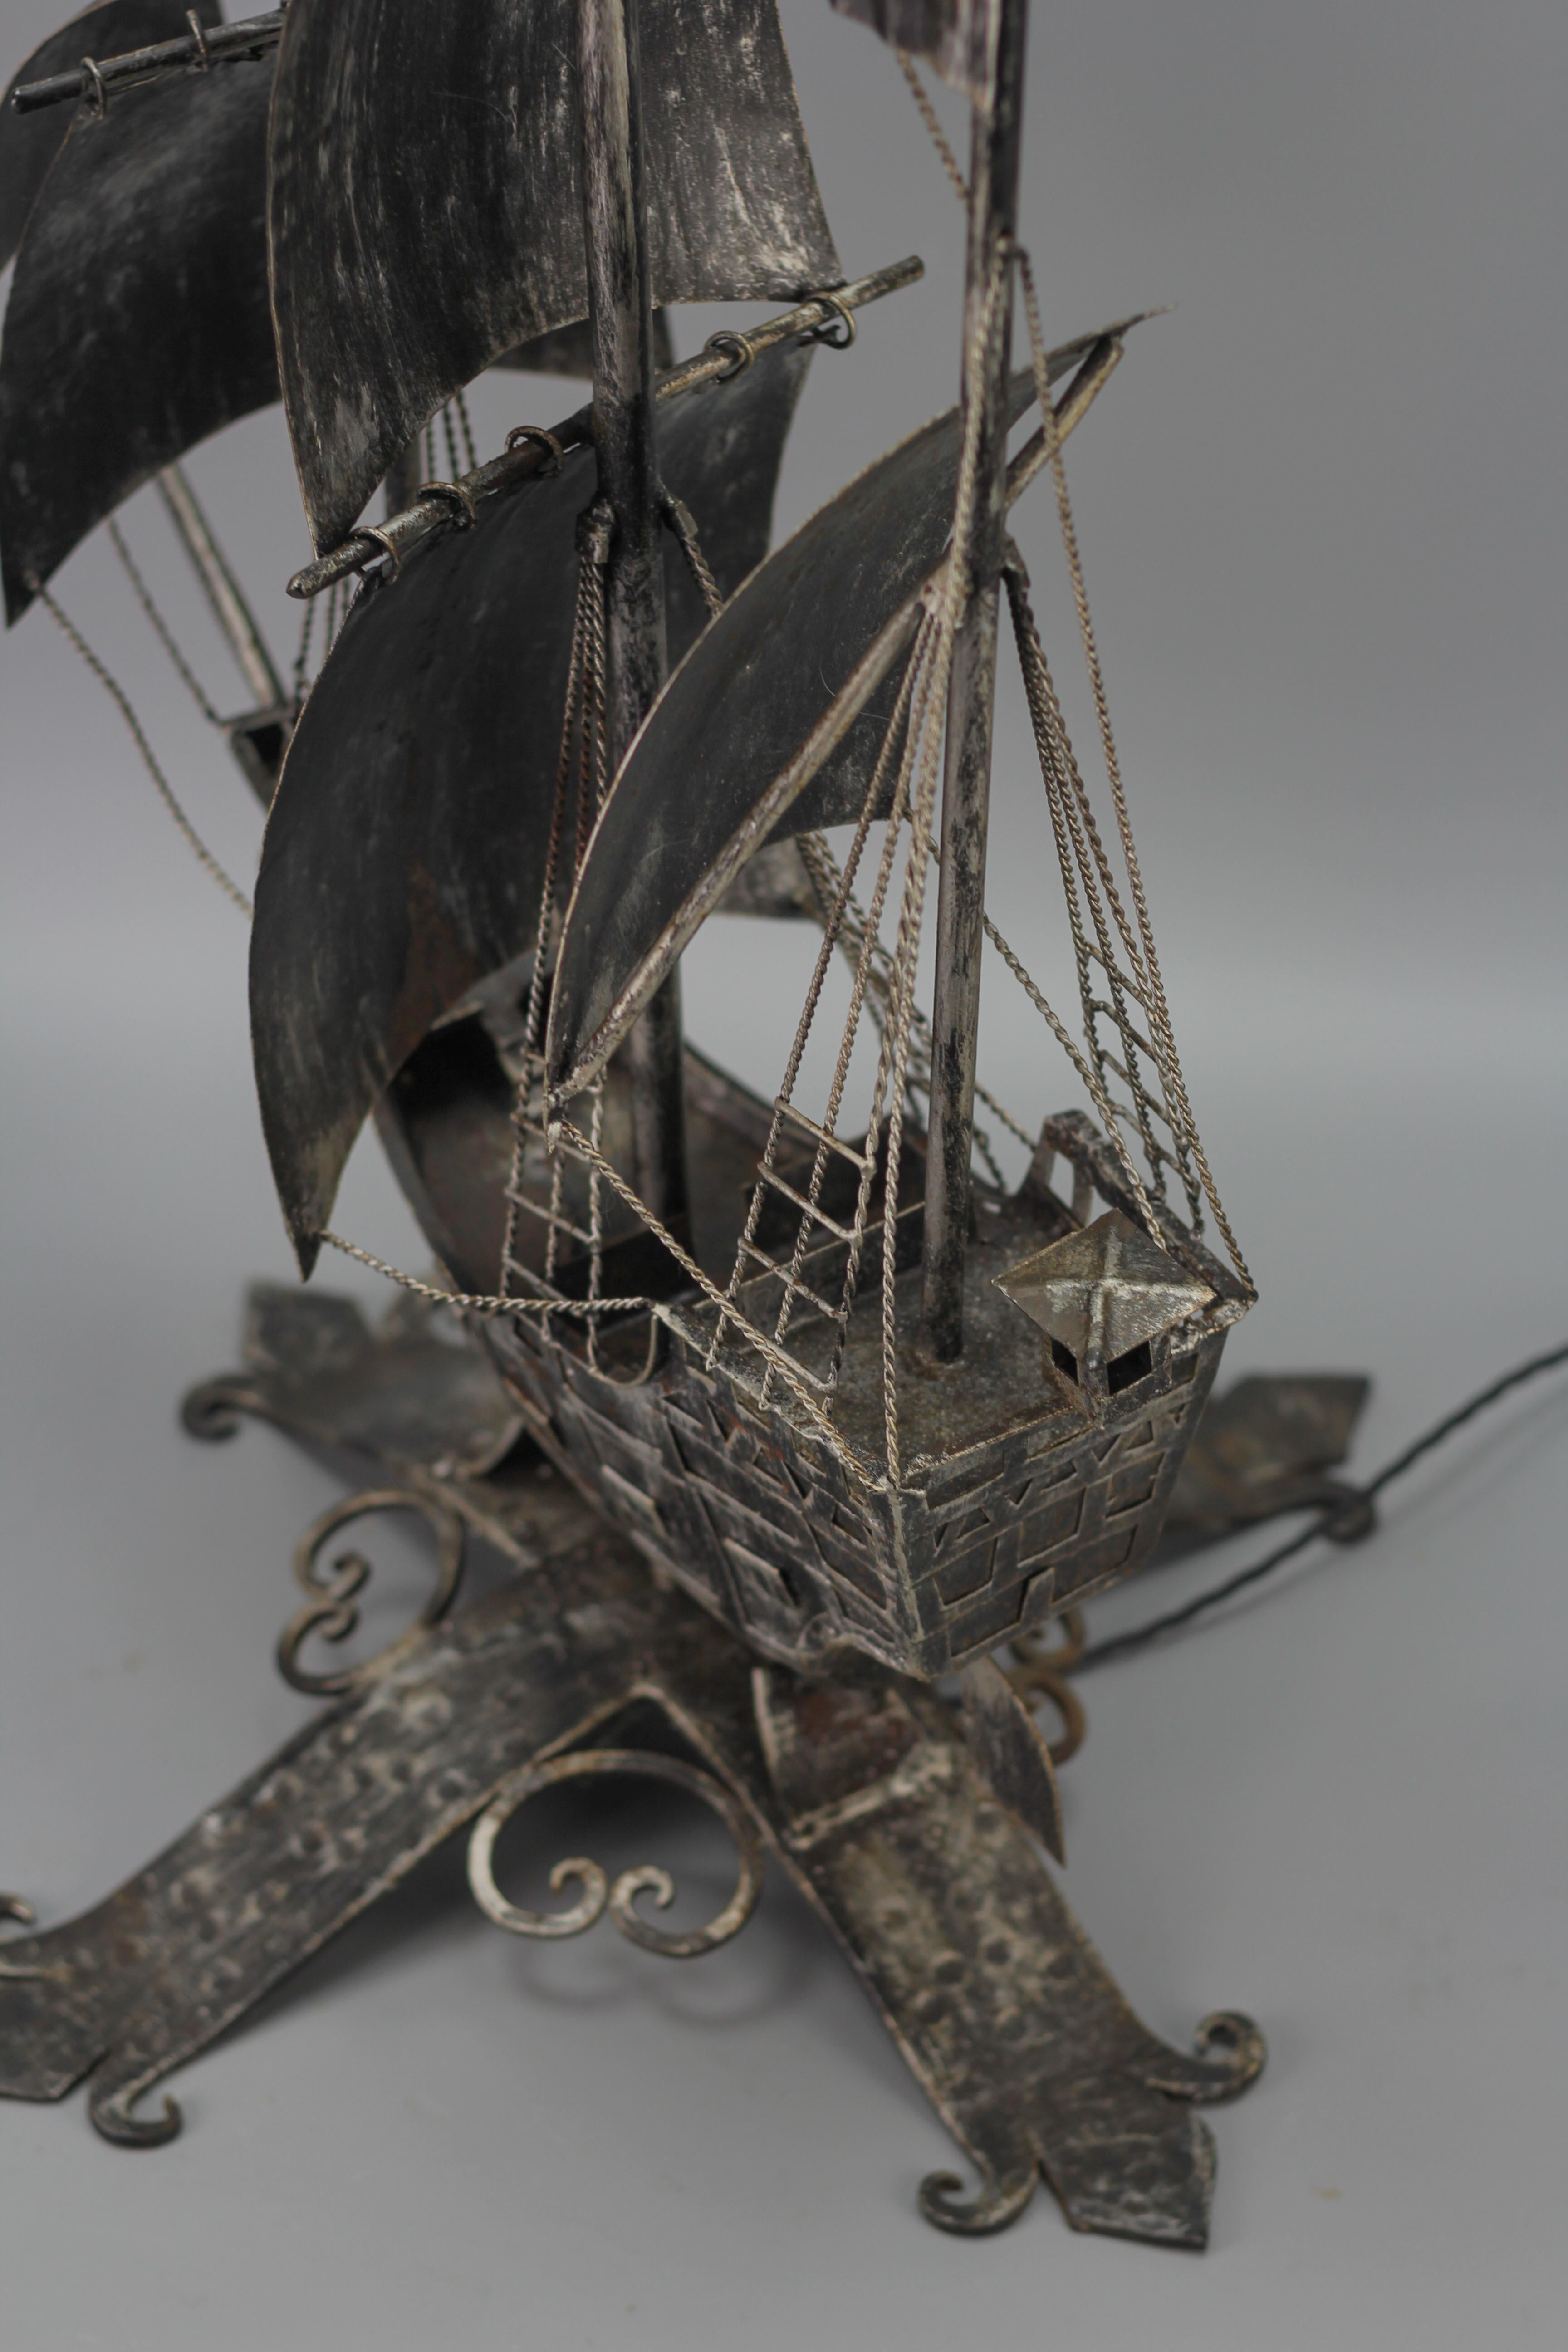 Wrought Iron and Glass Spanish Galleon Sailing Ship Shaped Floor Lamp, 1950s For Sale 5